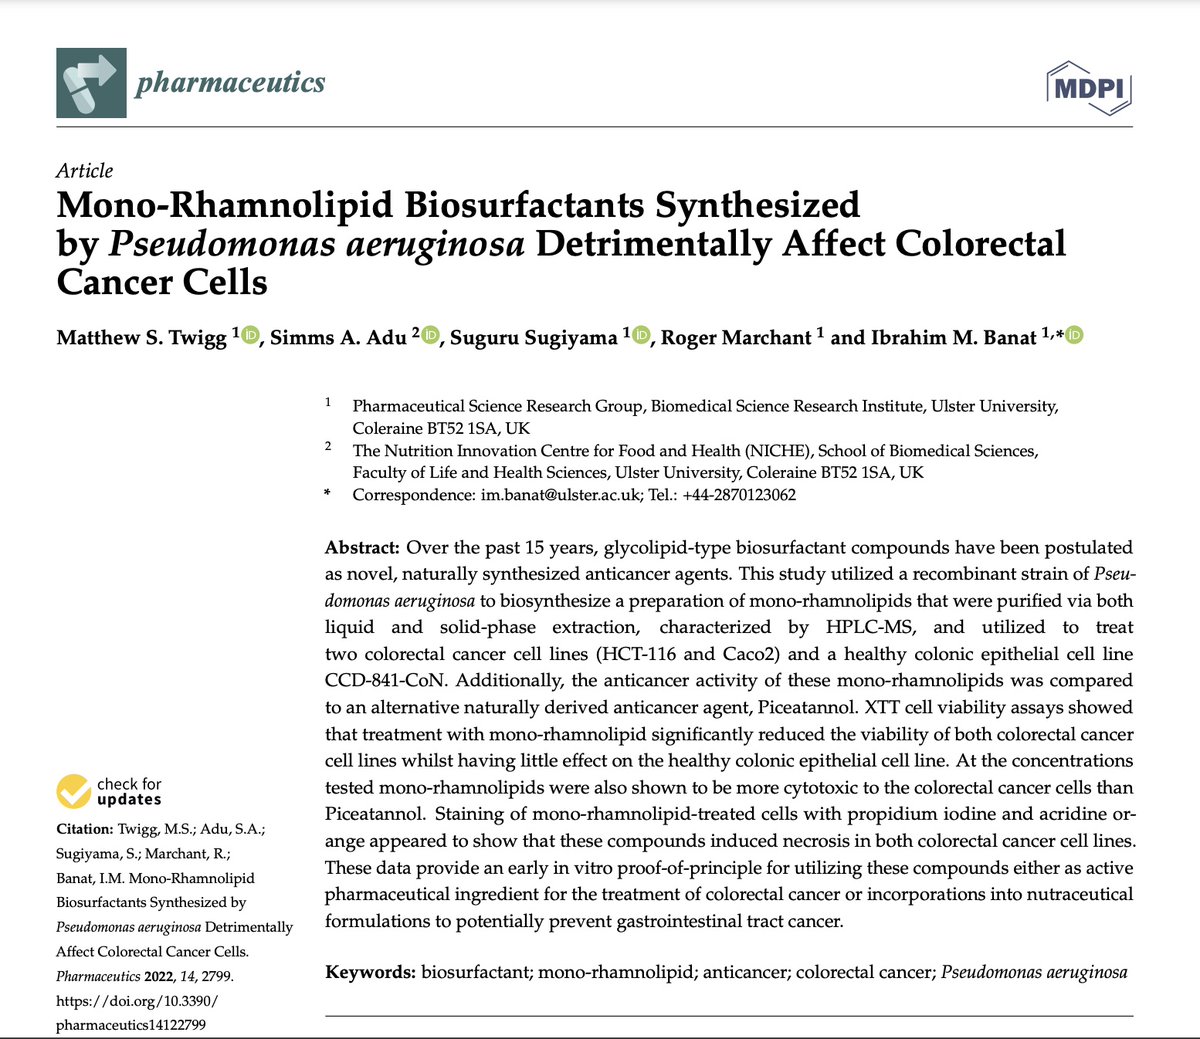 Our latest publication on anticancer effects of #rhamnolipid #biosurfactants on colorectal cancer cells Link to access article 👇👇 mdpi.com/1999-4923/14/1… #rhamnolipids #biosurfactants #colorectal_cancer #anticancer #sunstainability #chemotherapy